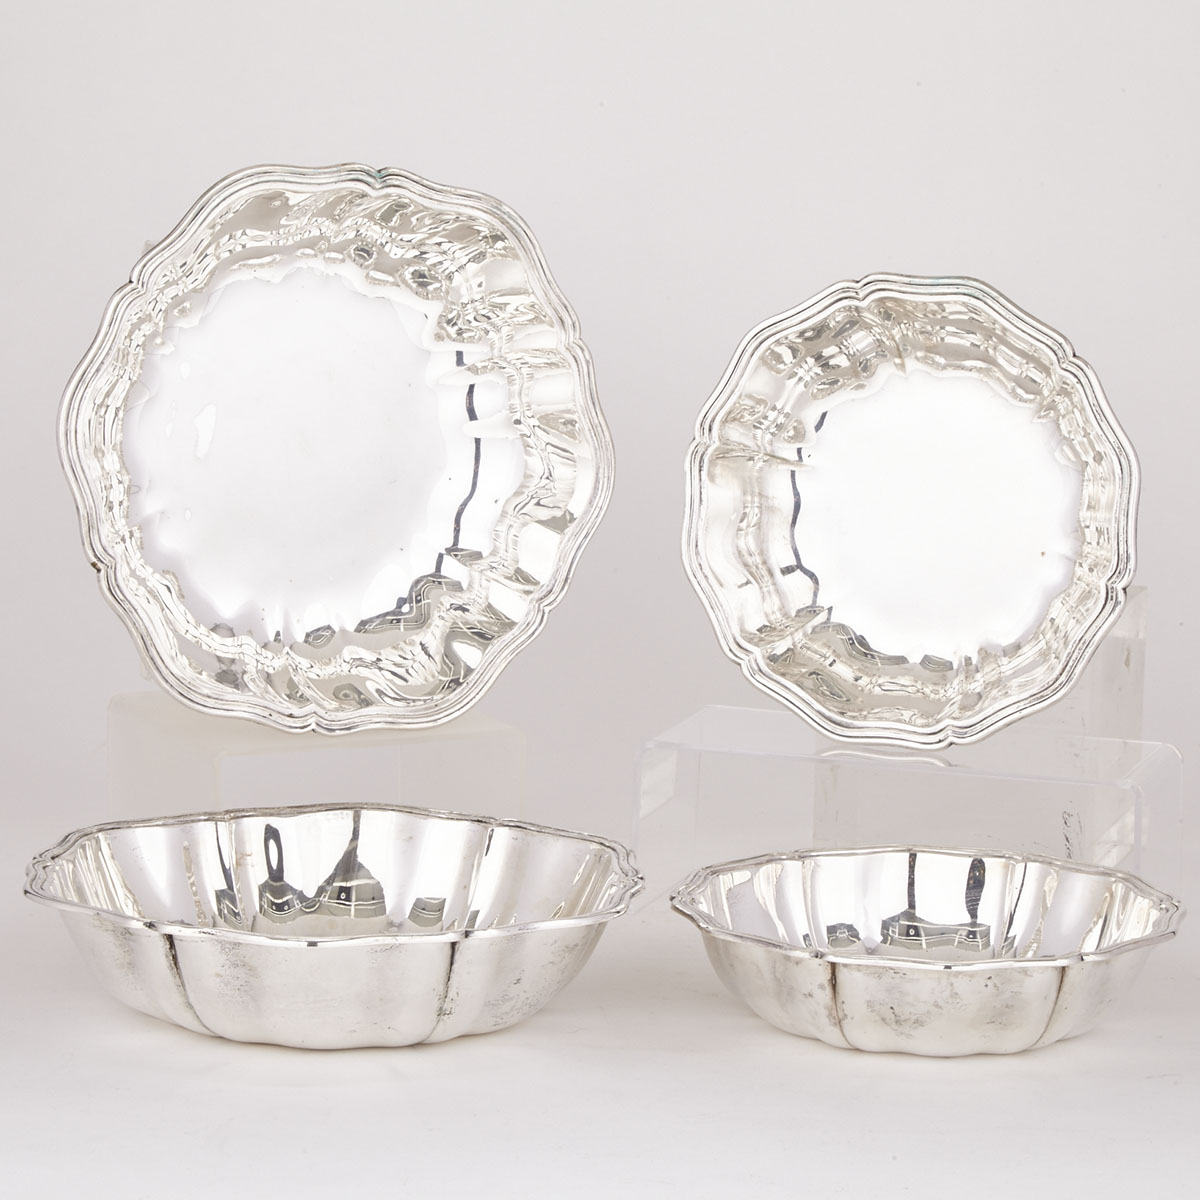 Two Pairs of German Silver Shaped Circular Serving Dishes, Hessenberg & Co., Frankfurt, early 20th century